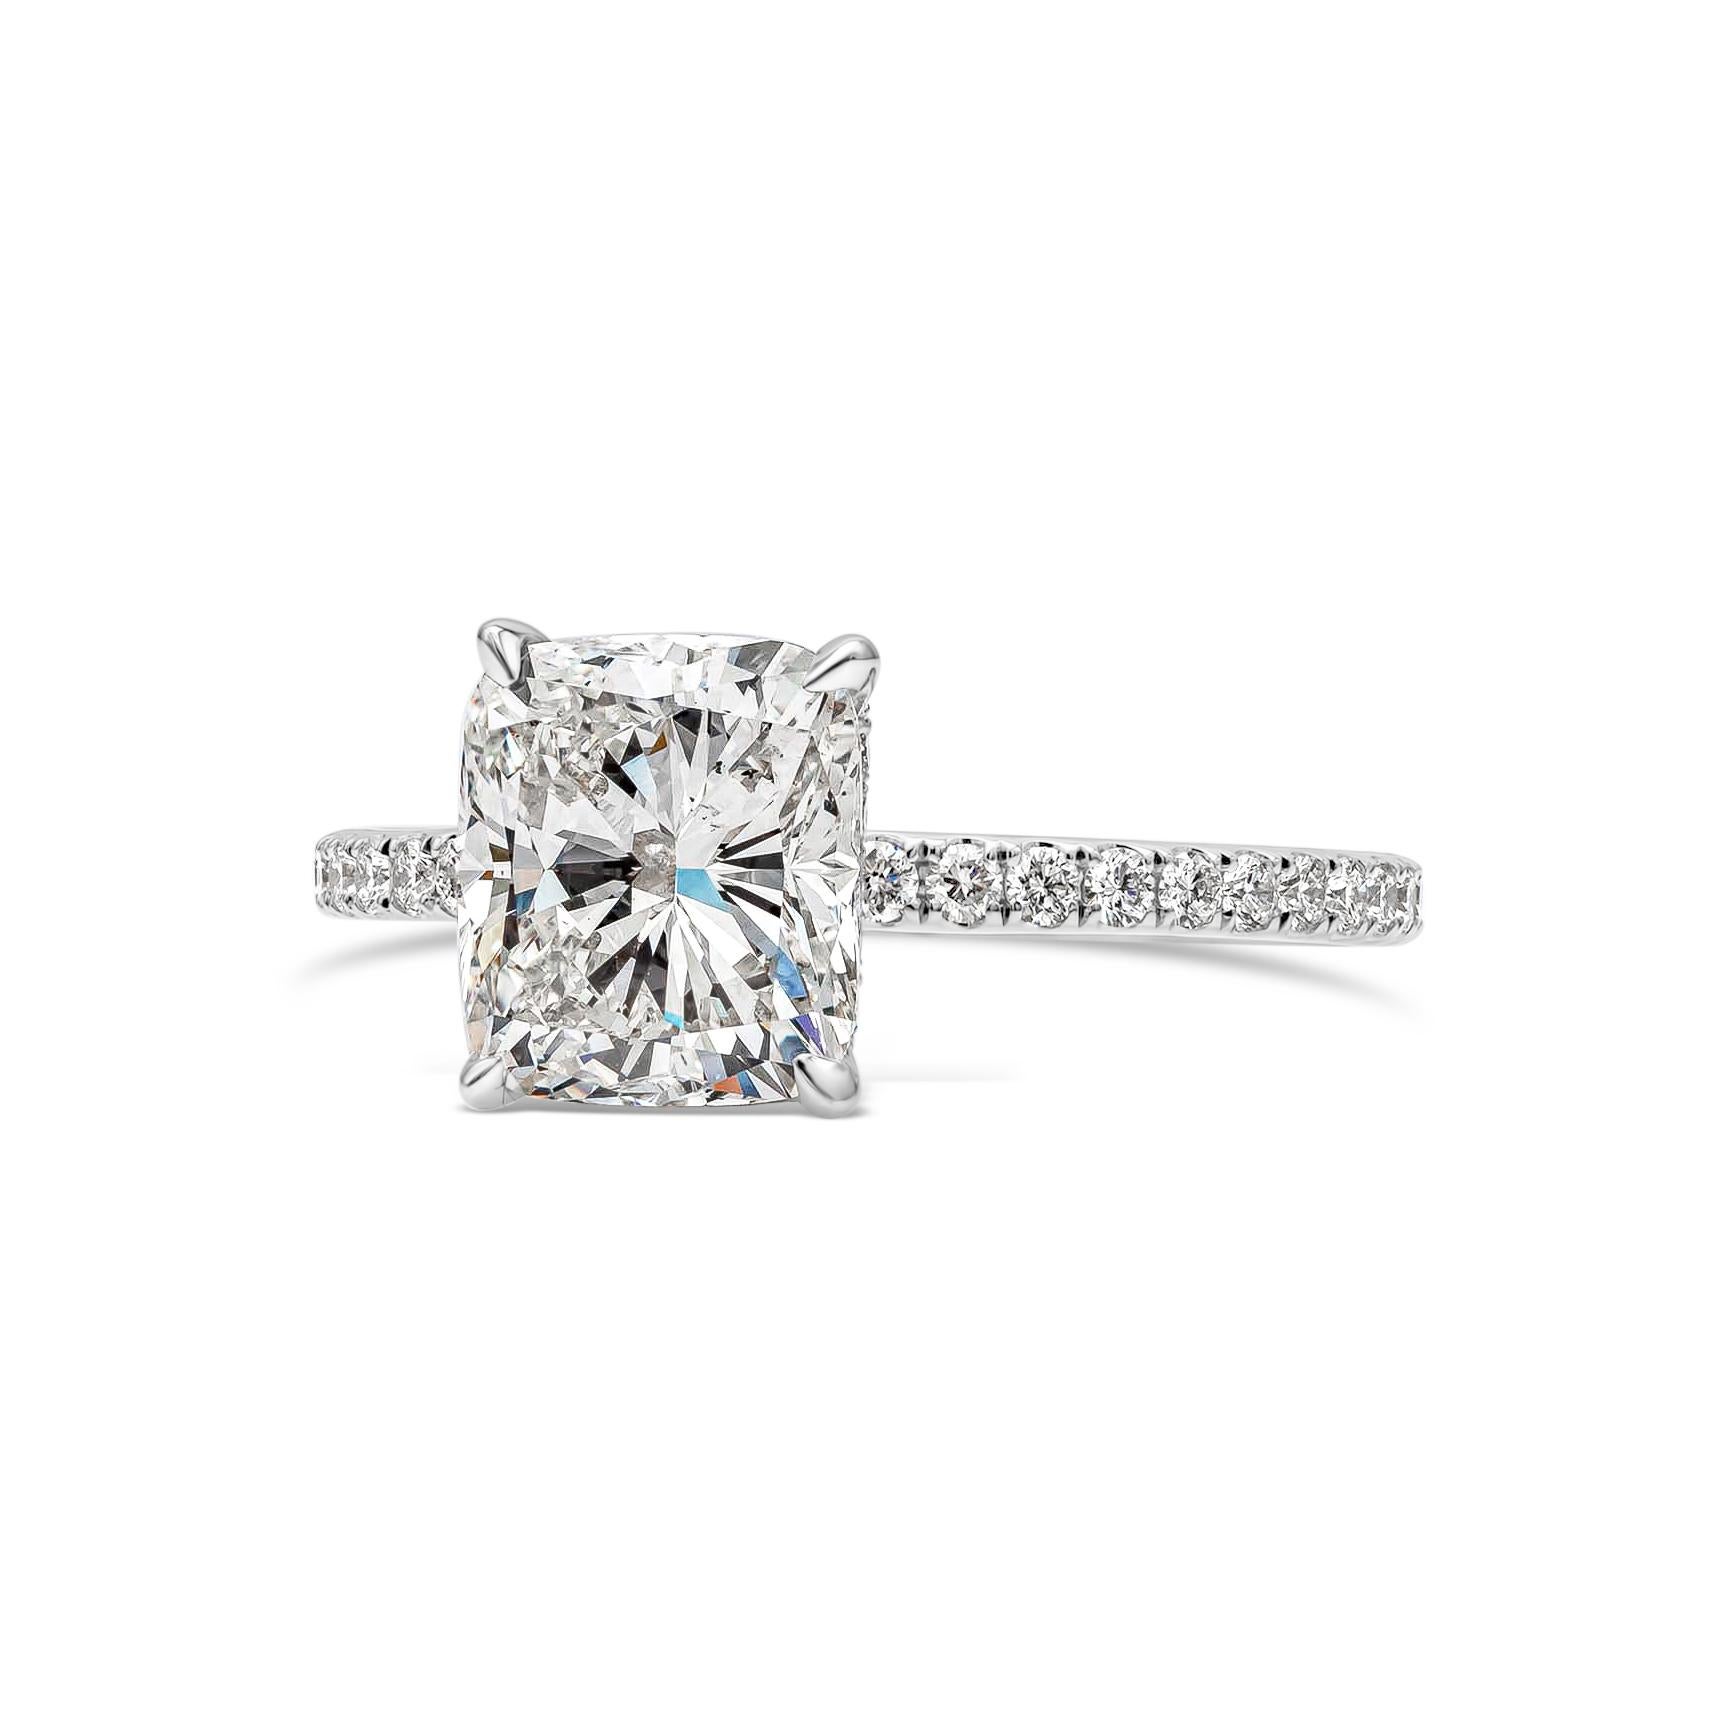 Features a 2.20 carats cushion cut diamond certified by GIA as G color, SI2 in clarity, set in a diamond encrusted band made in 18k white gold. Accent diamonds weigh 0.47 carats total. Size 6.75 US resizable upon request.

Style available in